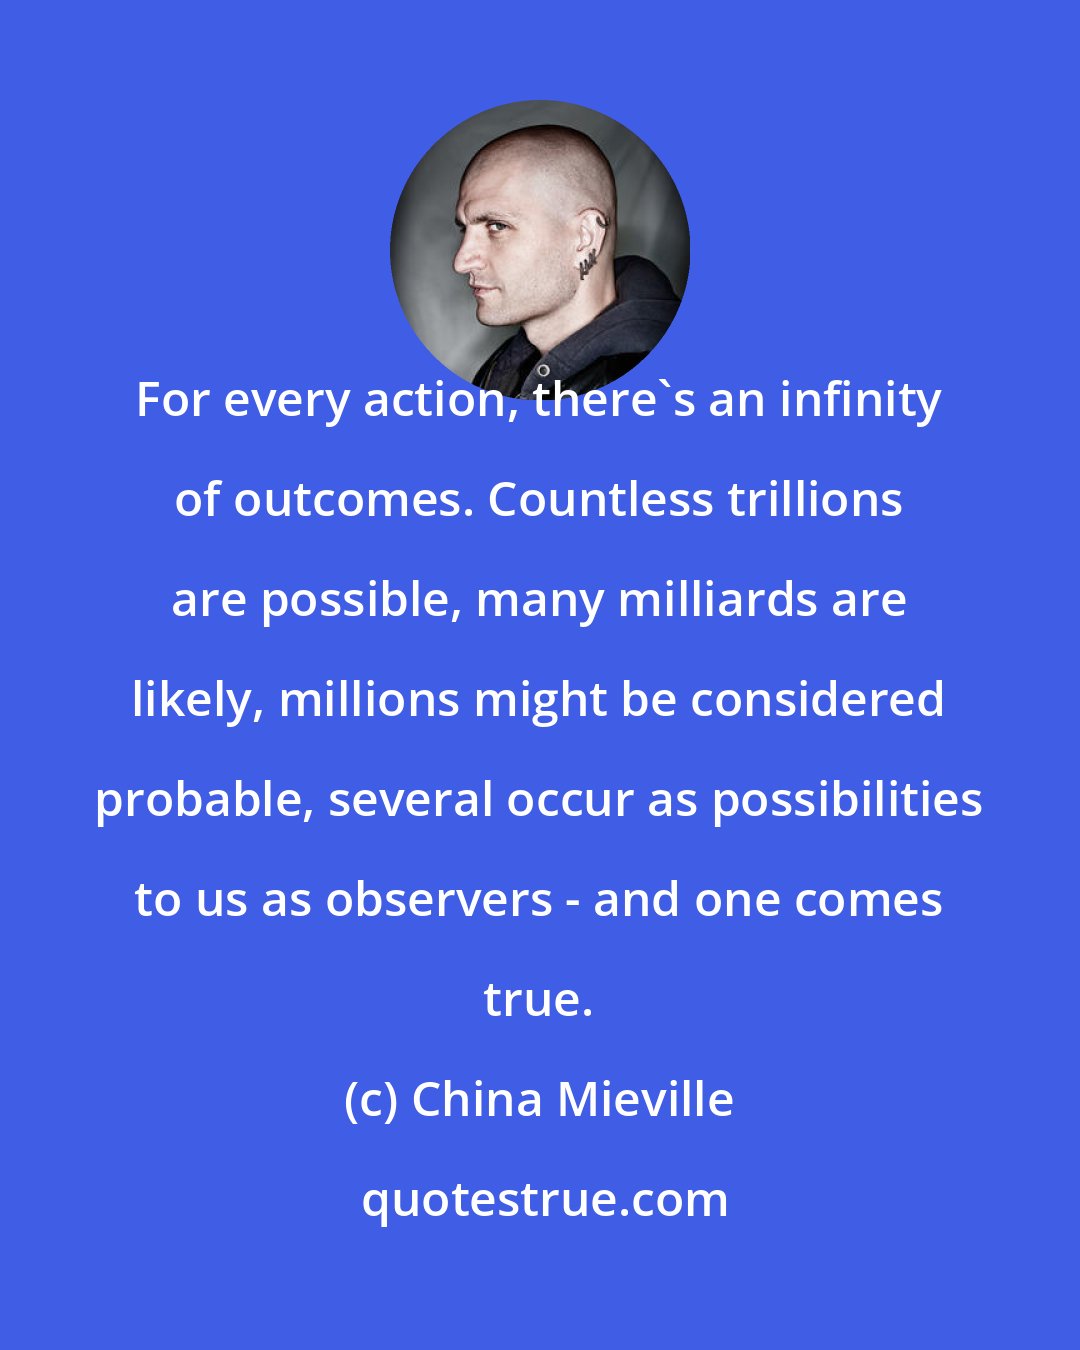 China Mieville: For every action, there's an infinity of outcomes. Countless trillions are possible, many milliards are likely, millions might be considered probable, several occur as possibilities to us as observers - and one comes true.